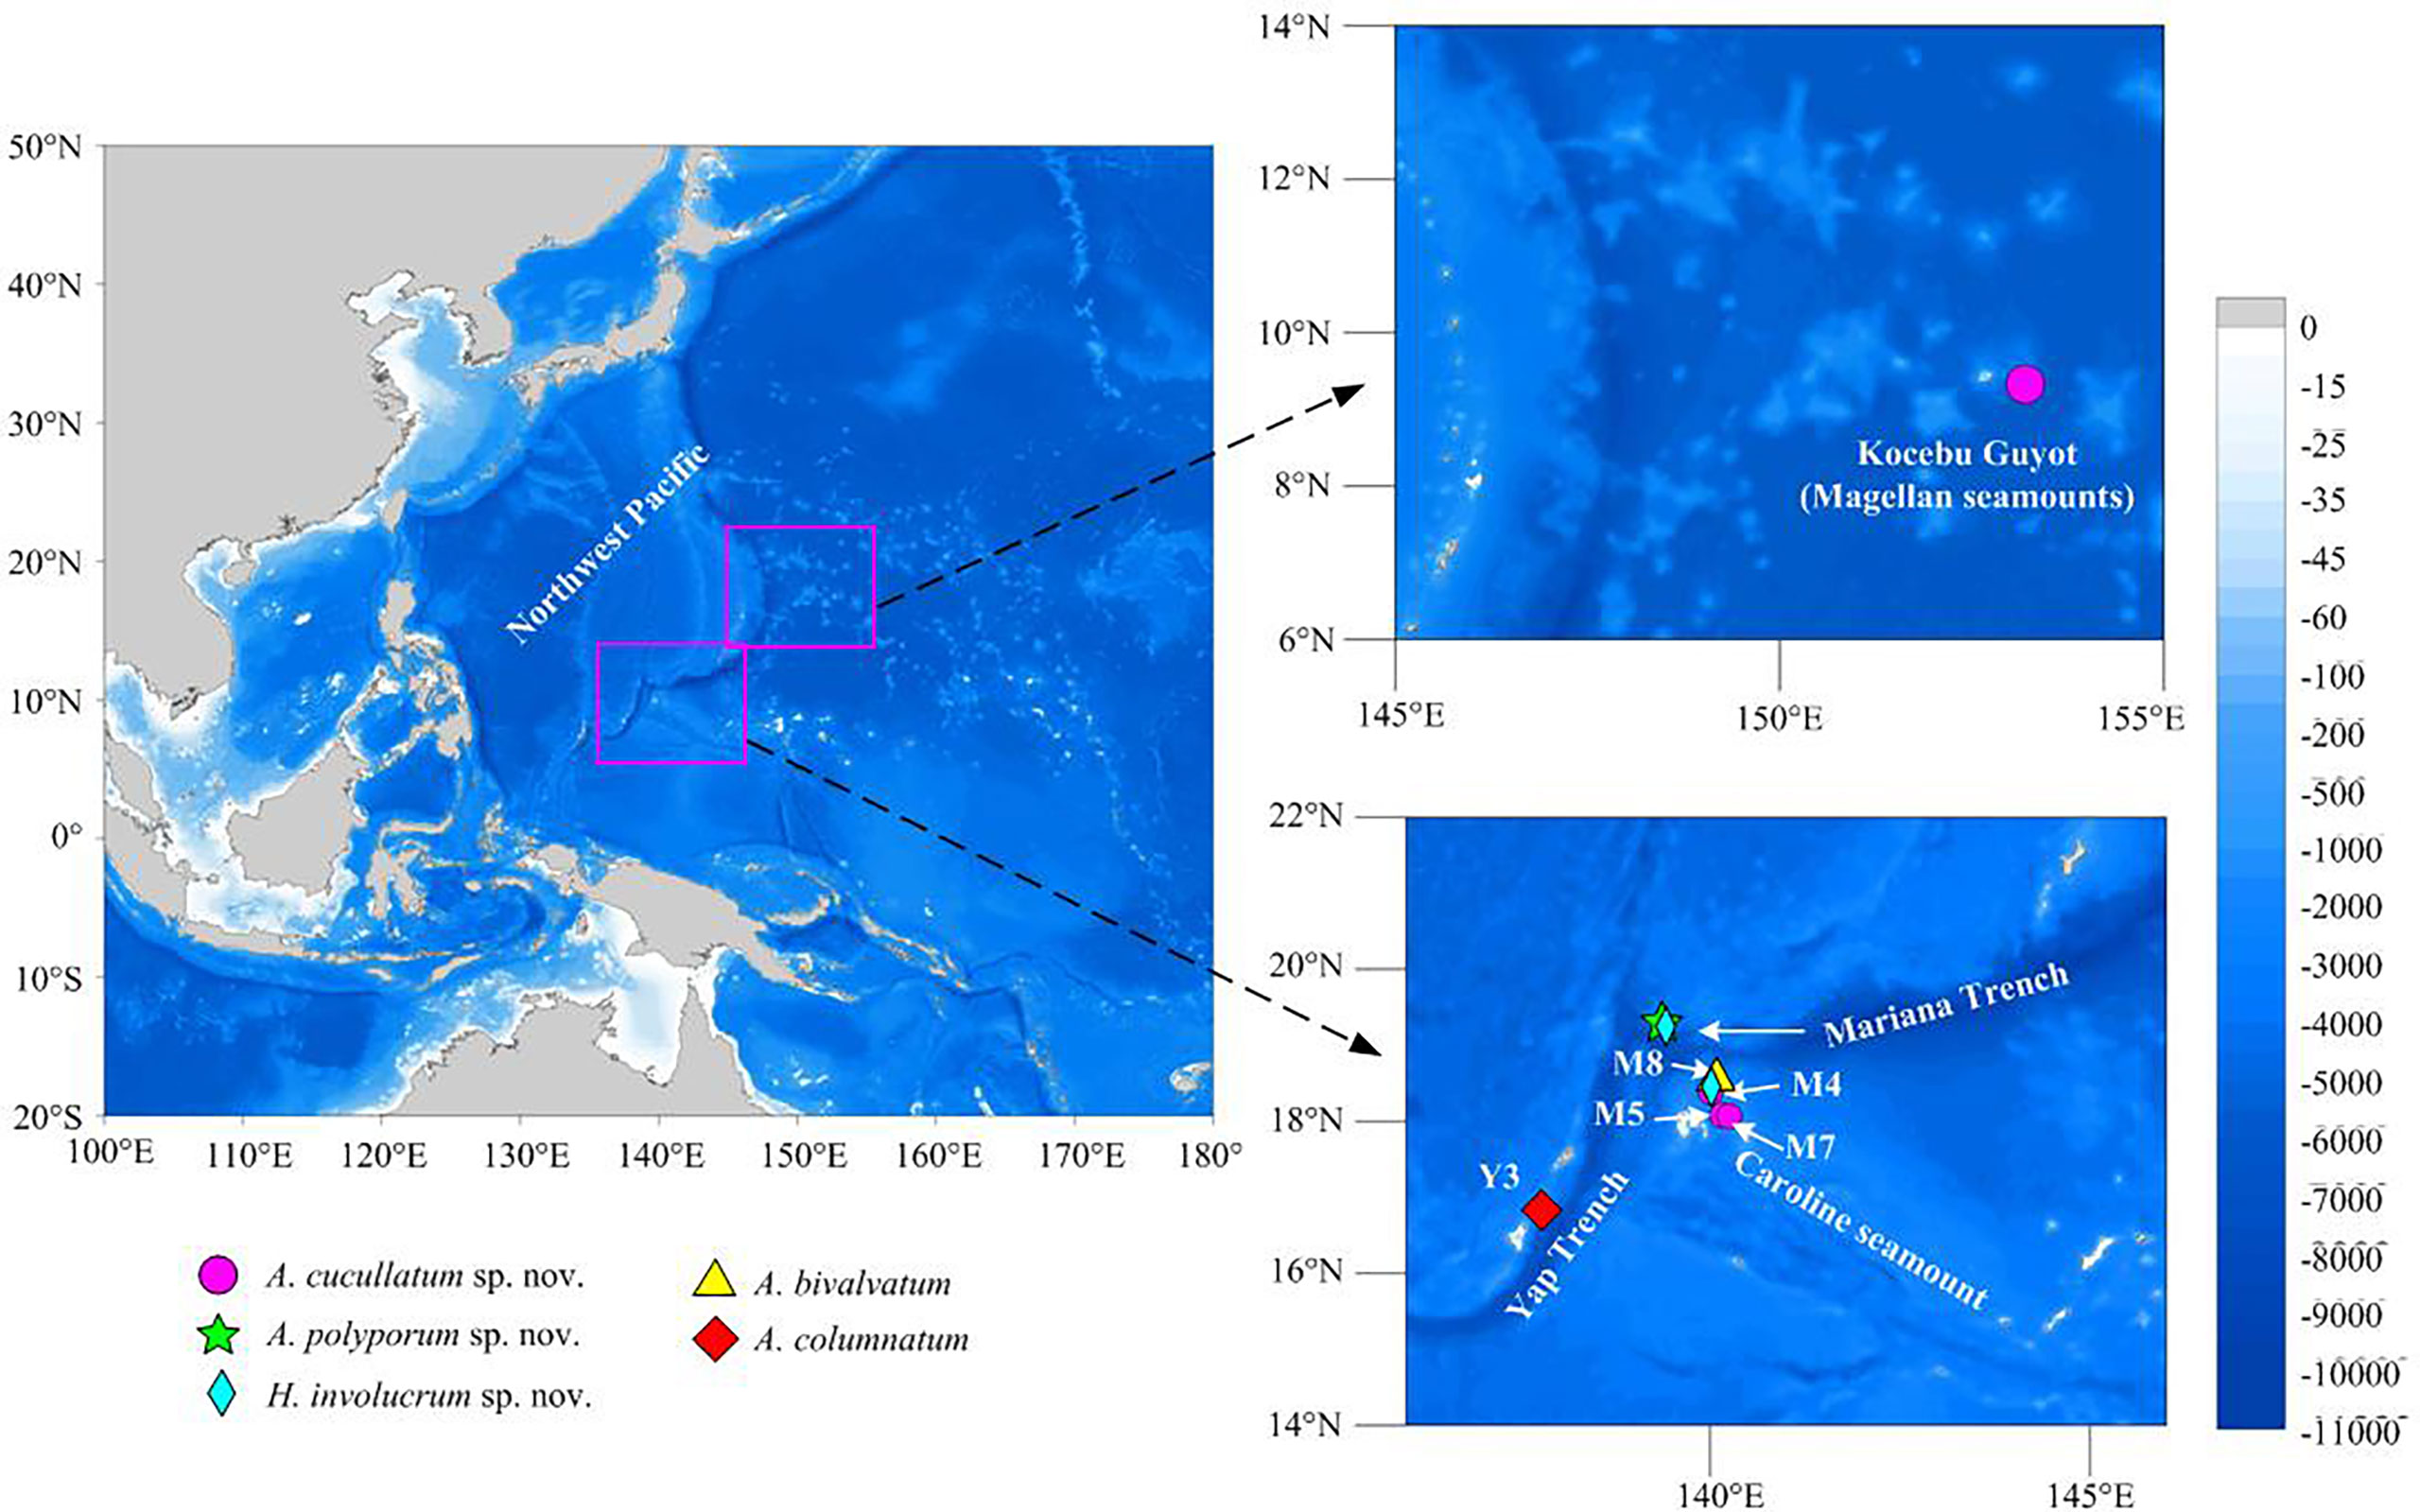 Frontiers  Three new species and two new records of Echinothuriidae  (Echinodermata: Echinothurioida) from seamounts in the Northwest Pacific  Ocean: Diversity, phylogeny and biogeography of deep-sea echinothuriids